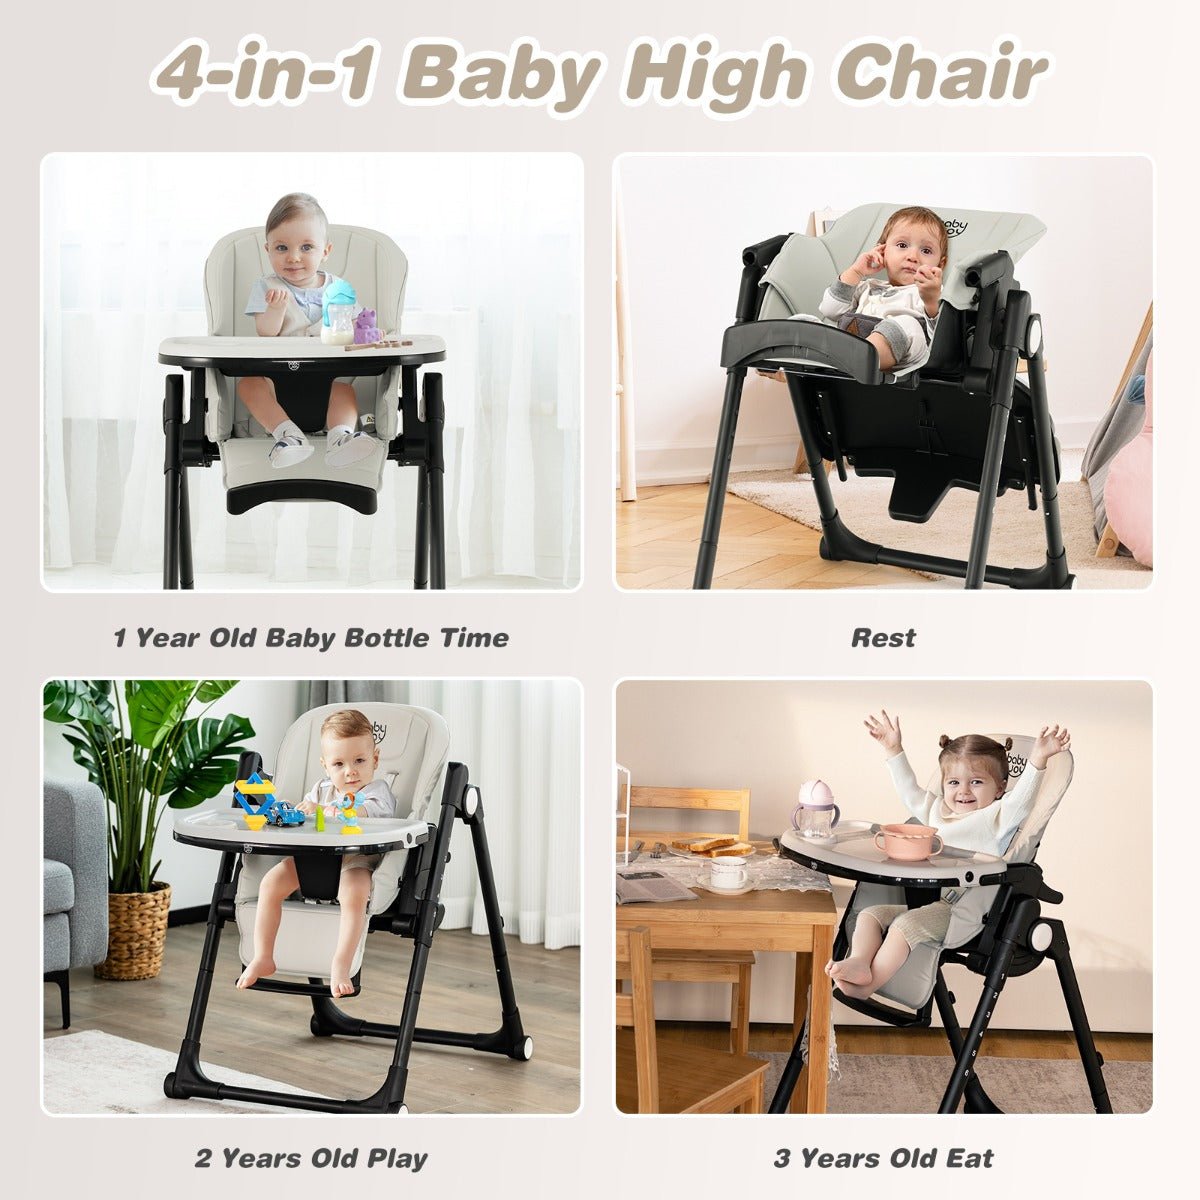 Convertible Baby Chair for Eating, Playing, and More